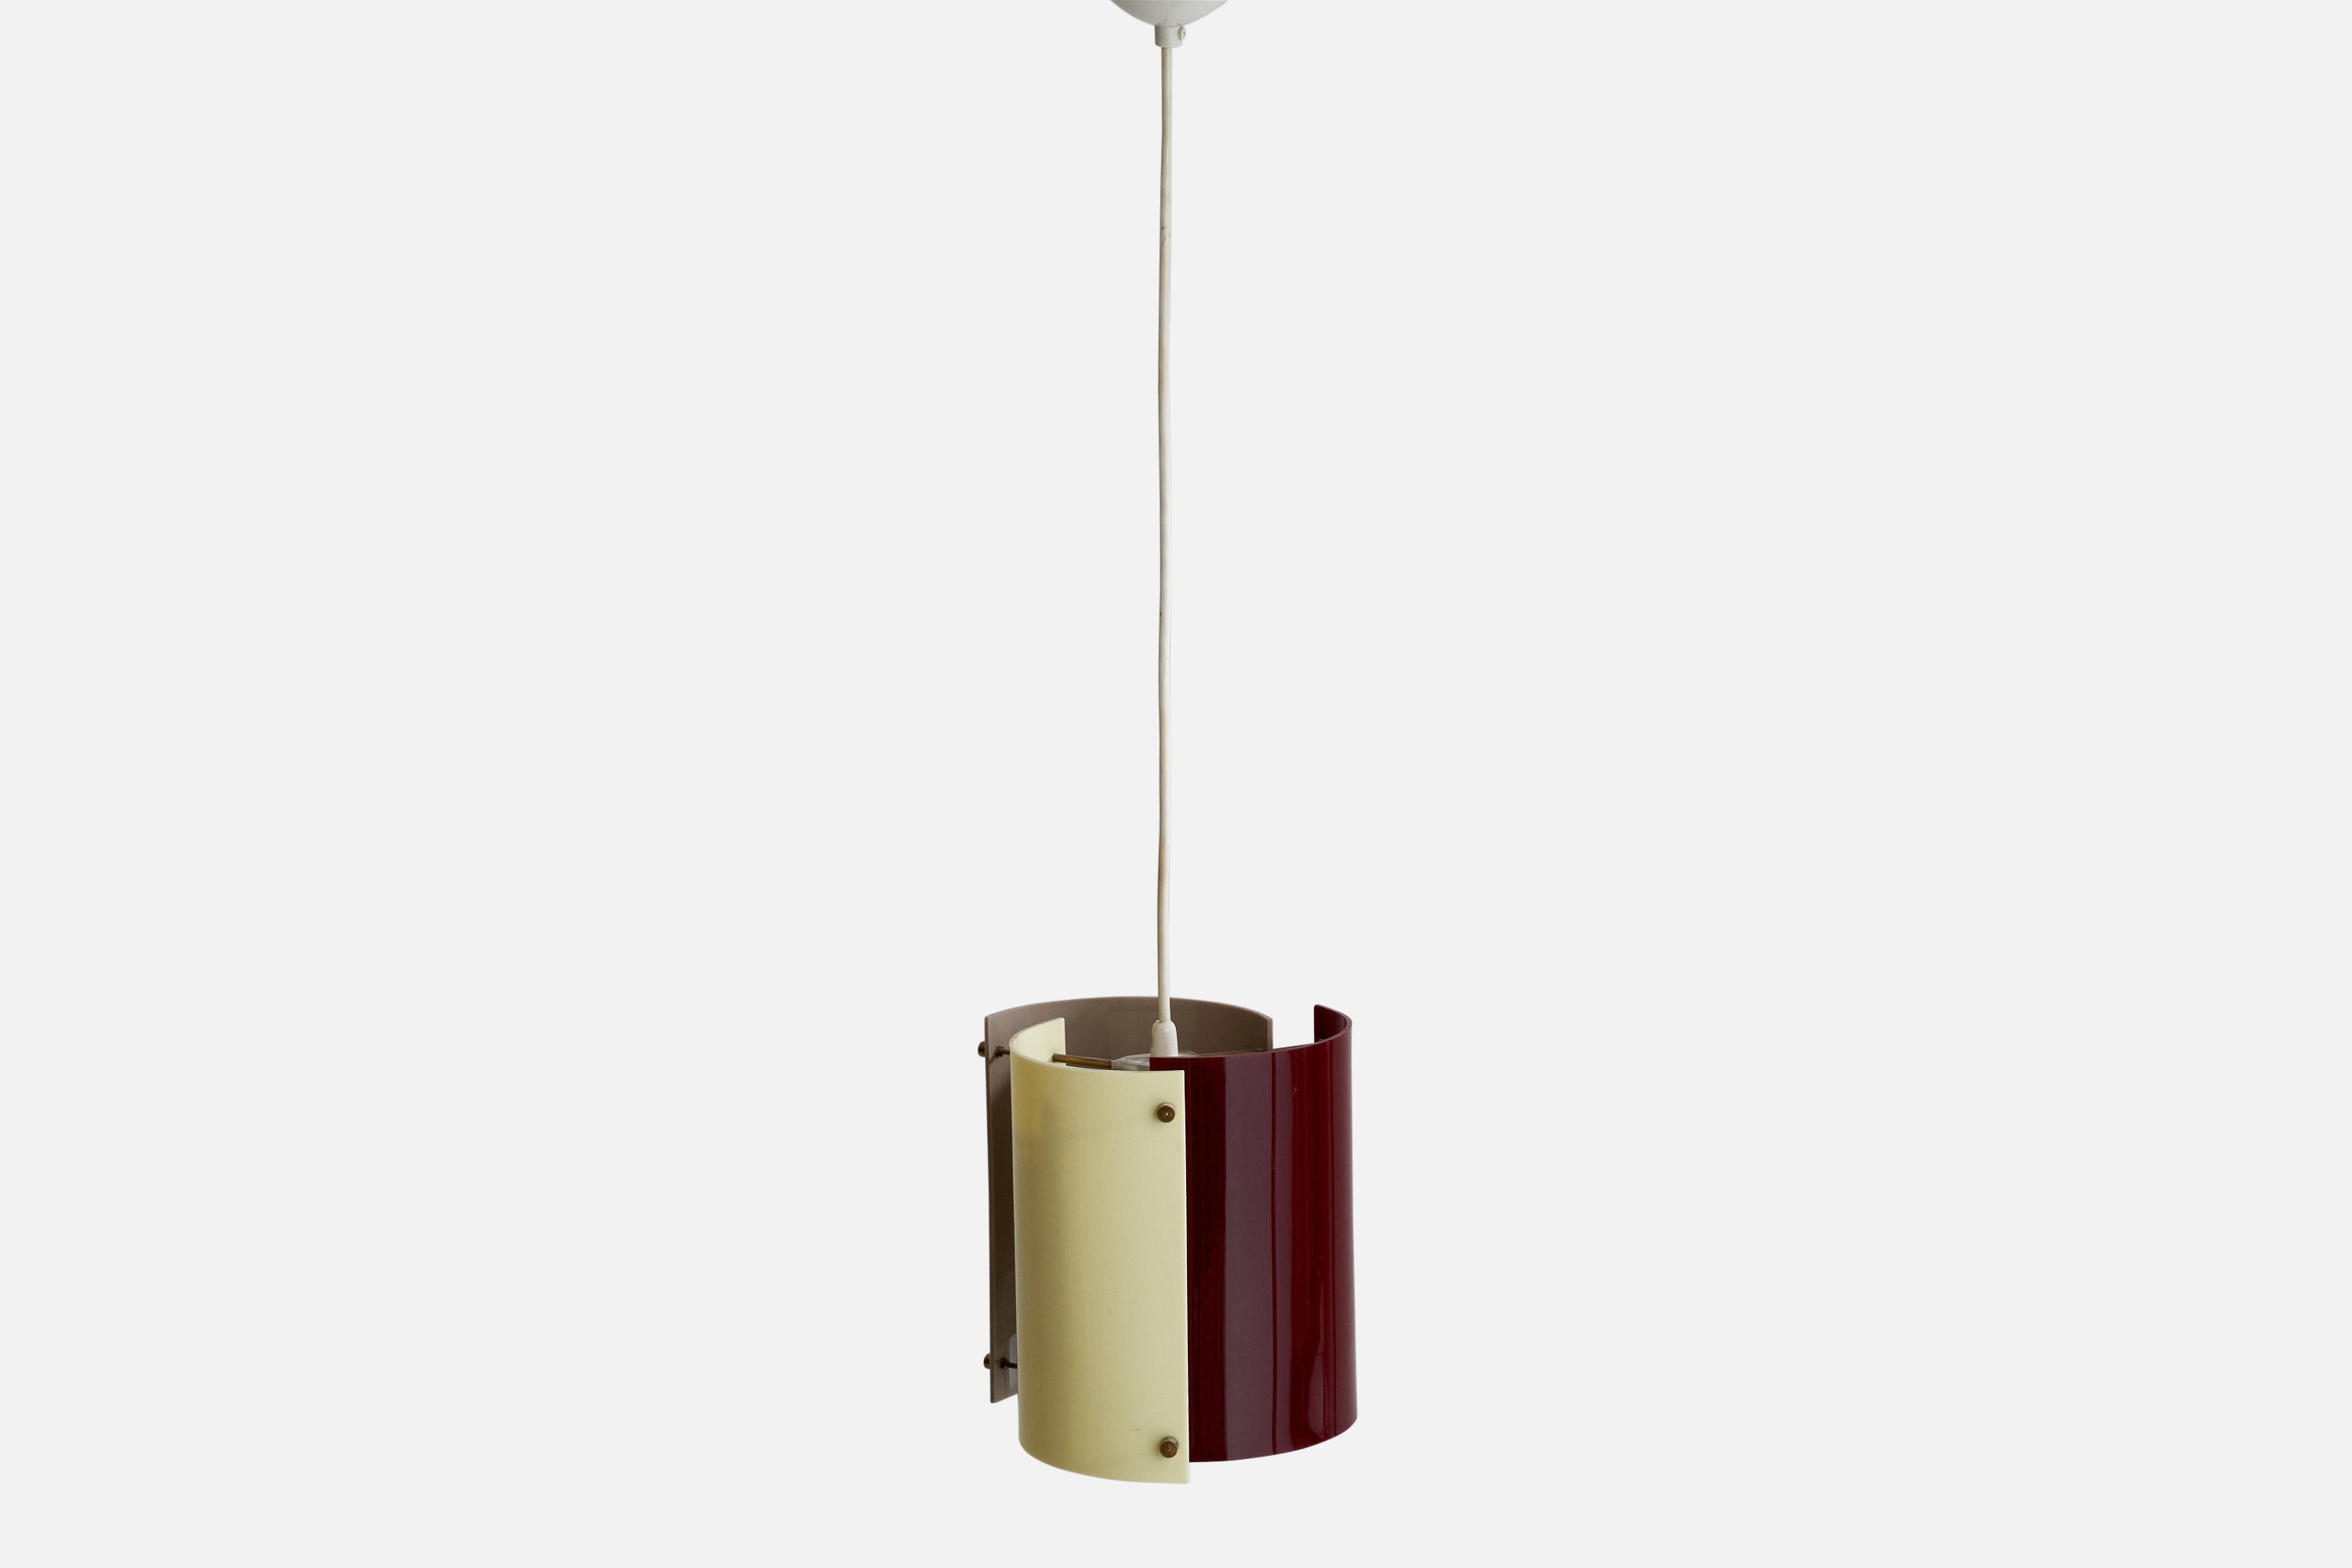 A brass and red, yellow and grey-coloured acrylic pendant light designed by Yki Nummi and produced by Orno, Finland, c. 1960s.

Dimensions of canopy (inches): 2.75” H x 4” Diameter
Socket takes standard E-26 bulbs. 1 socket.There is no maximum